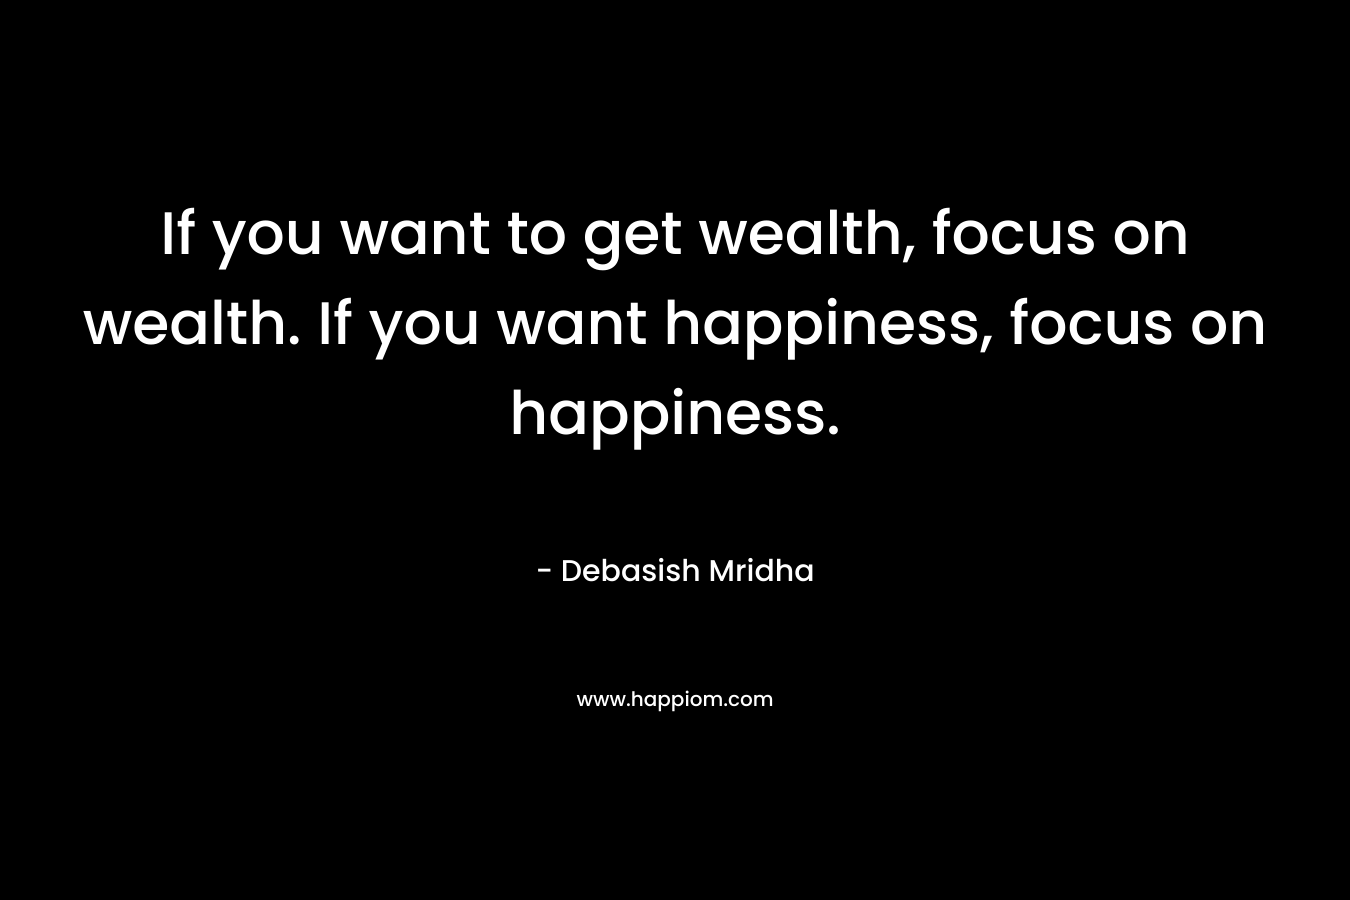 If you want to get wealth, focus on wealth. If you want happiness, focus on happiness.